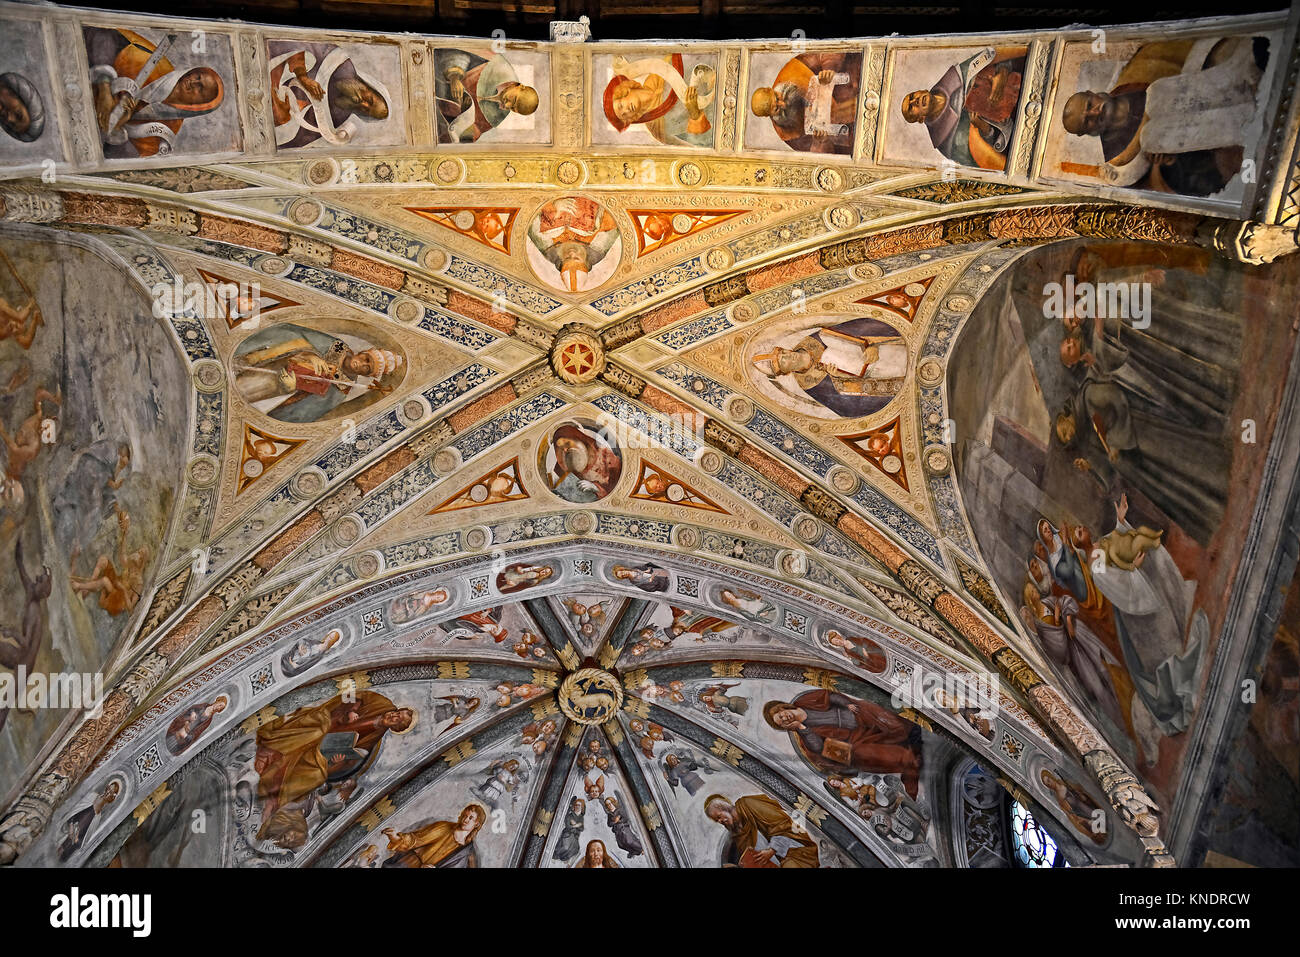 Italy S.Daniele del Friuli Church of S. Antonio Abate. Cycle of frescoes ,from the 15th century by Pellegrino da San Daniele. The vault of the presbytery. Stock Photo